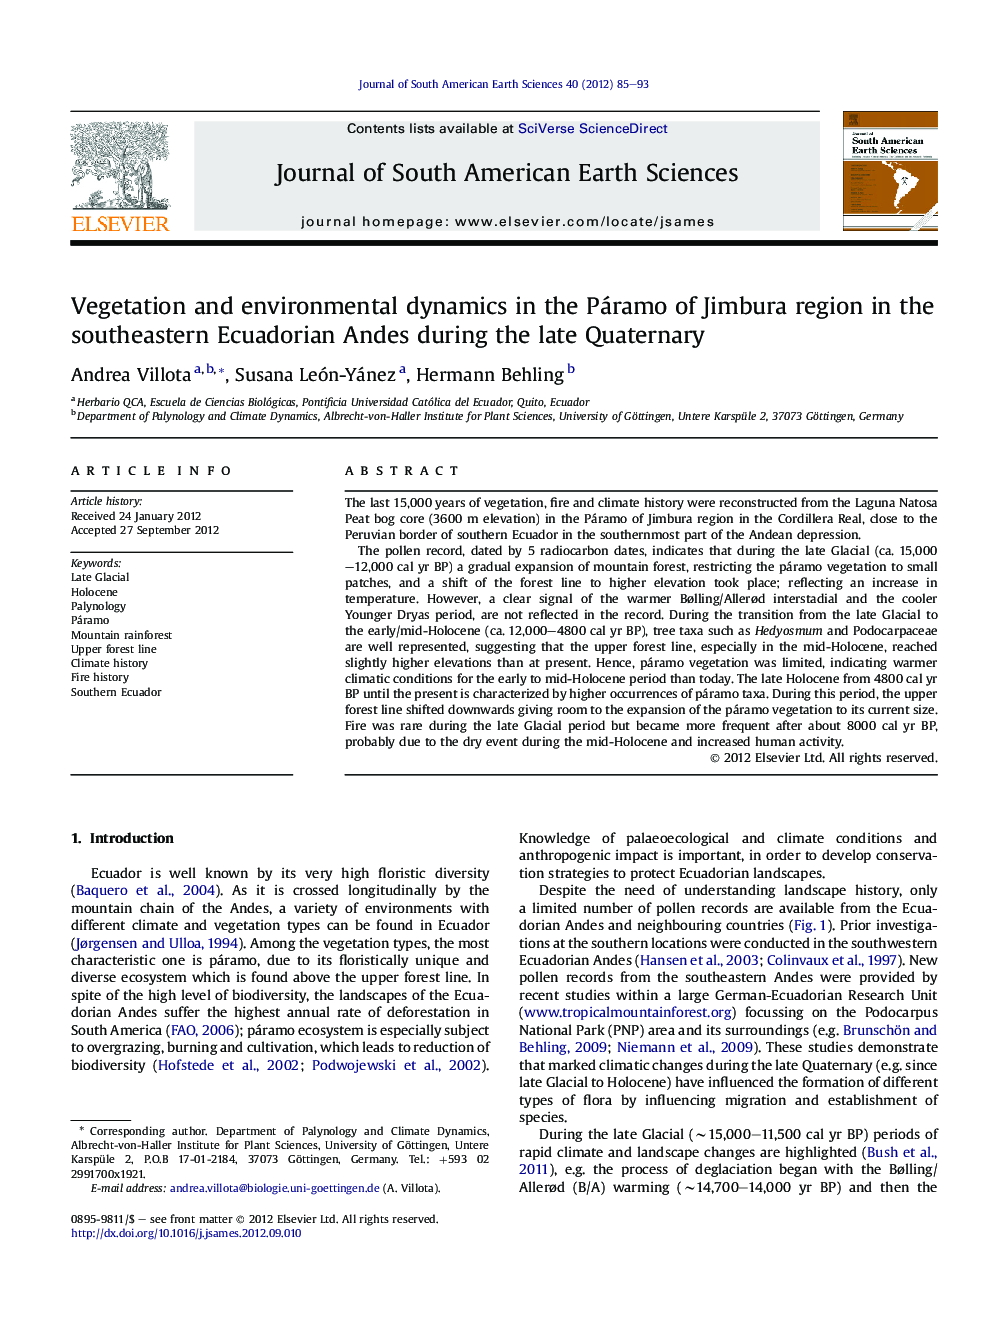 Vegetation and environmental dynamics in the Páramo of Jimbura region in the southeastern Ecuadorian Andes during the late Quaternary